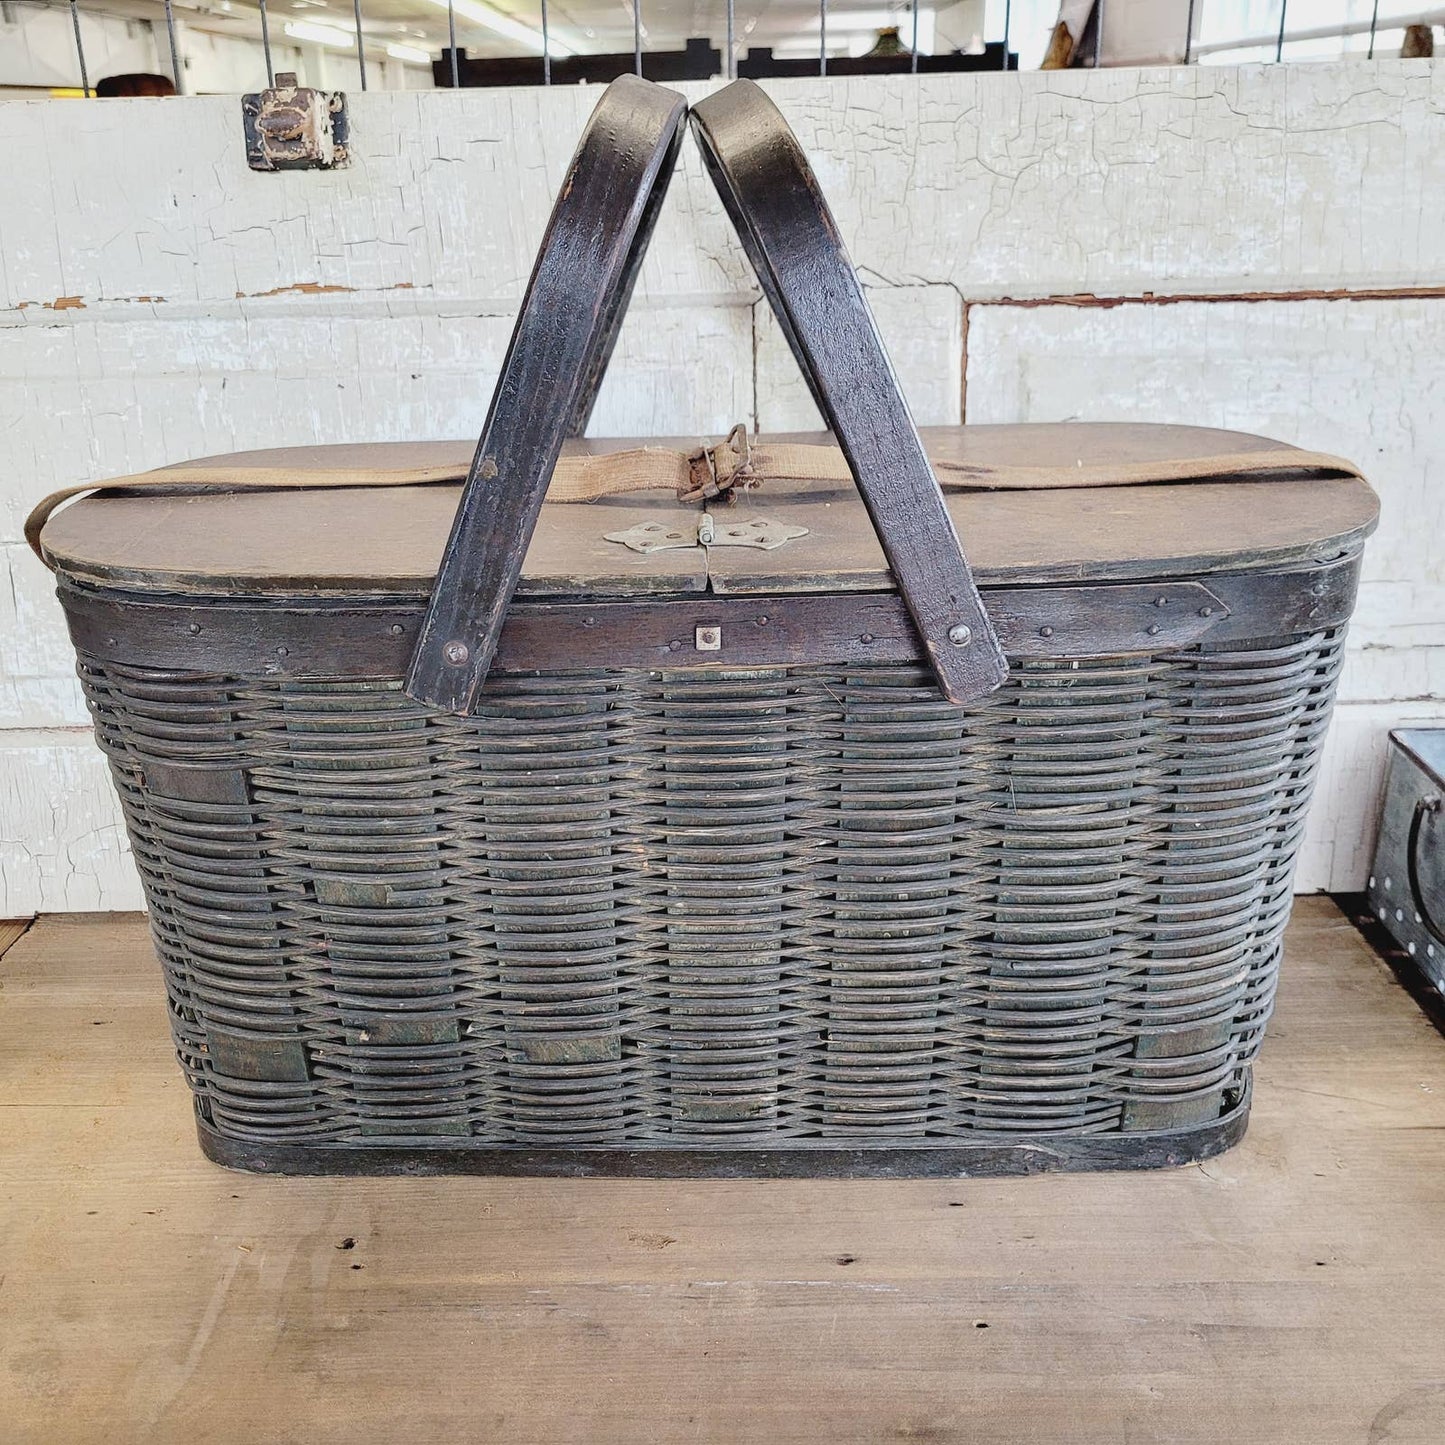 Antique Wooden Picnic Basket Hawkeye Refrigerator w/ Tin Insert and Containers